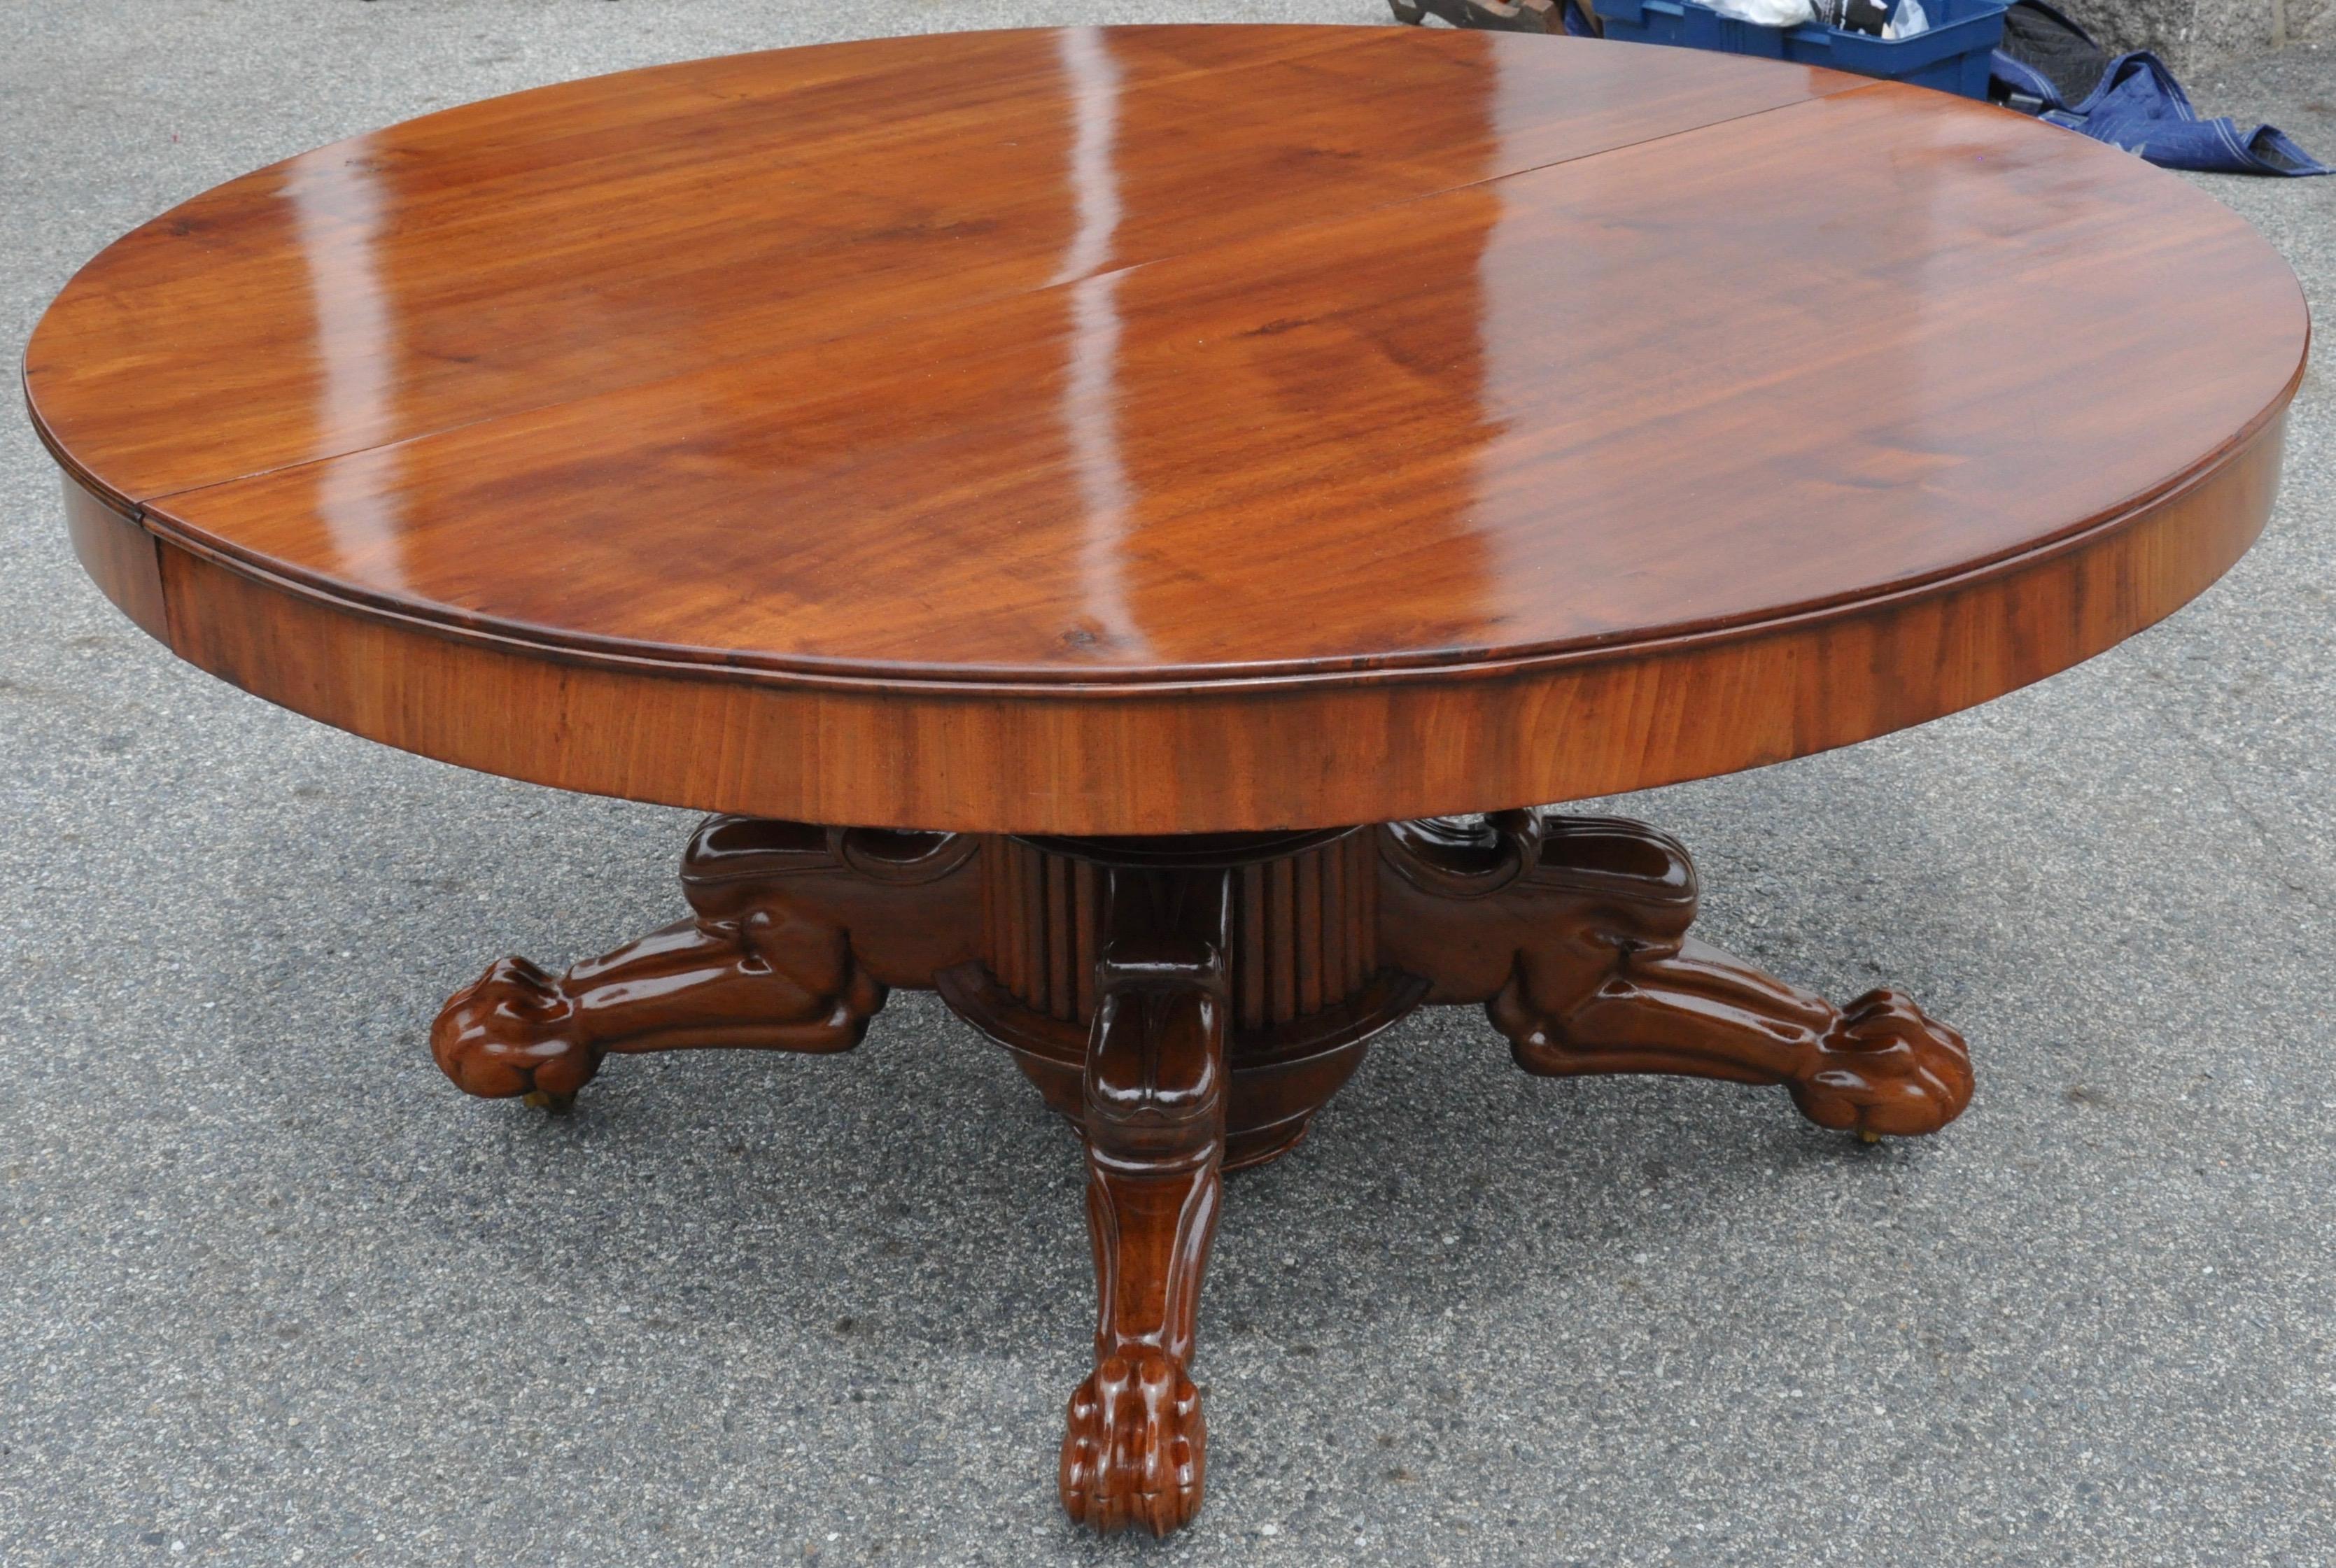 Carved Period Early 19th Century Neoclassical Walnut Round Expanding Dining Table